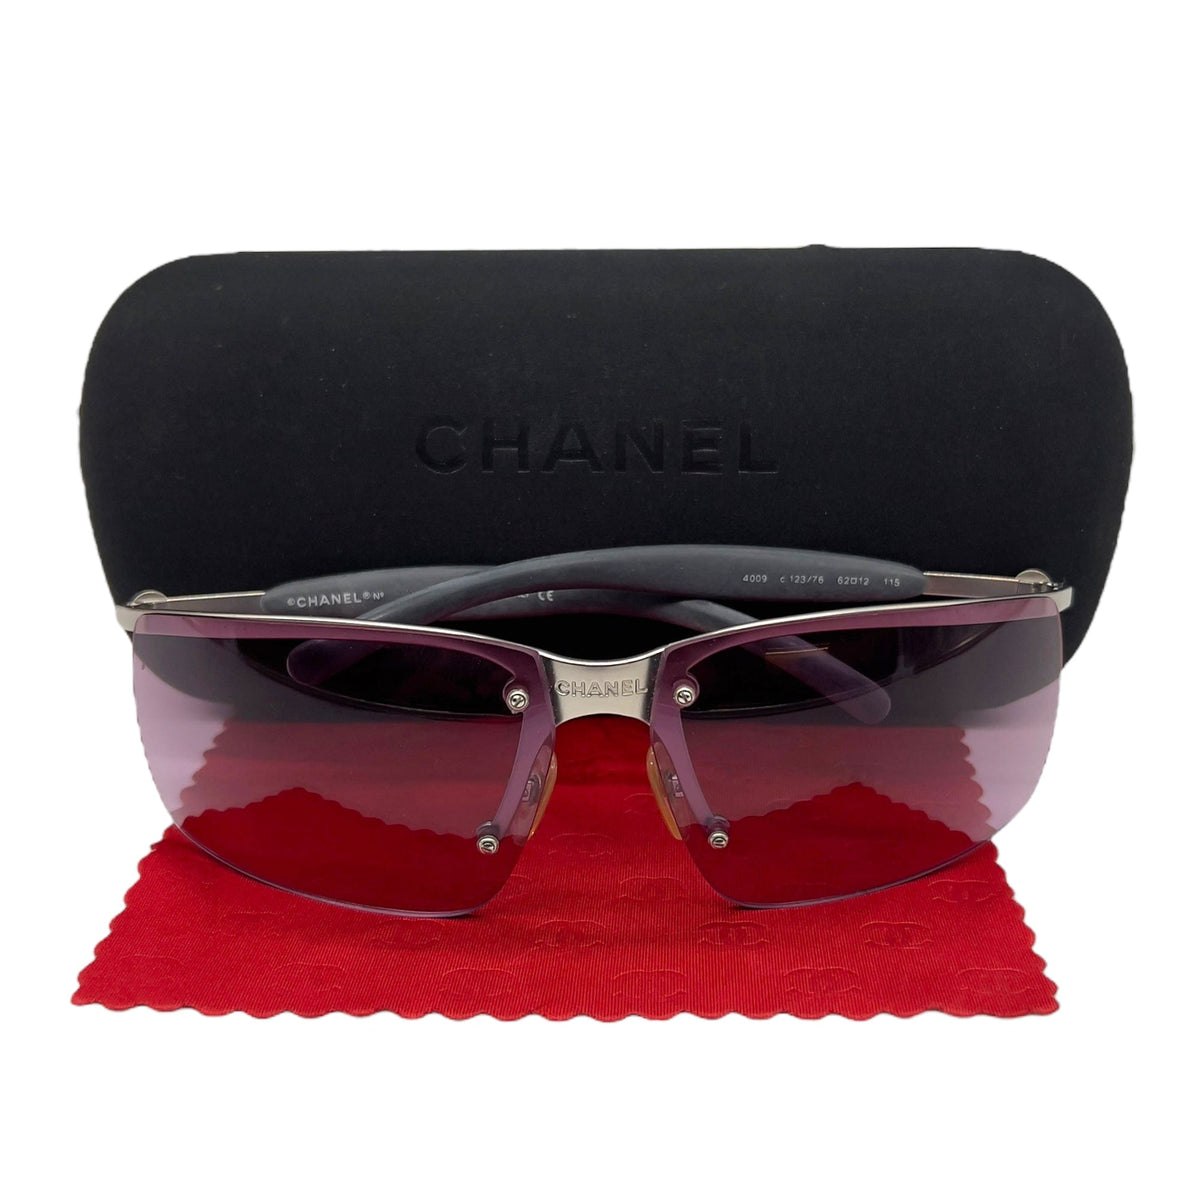 CHANEL, Accessories, Chanel Cc In Frame 9s Rimless Sunglass